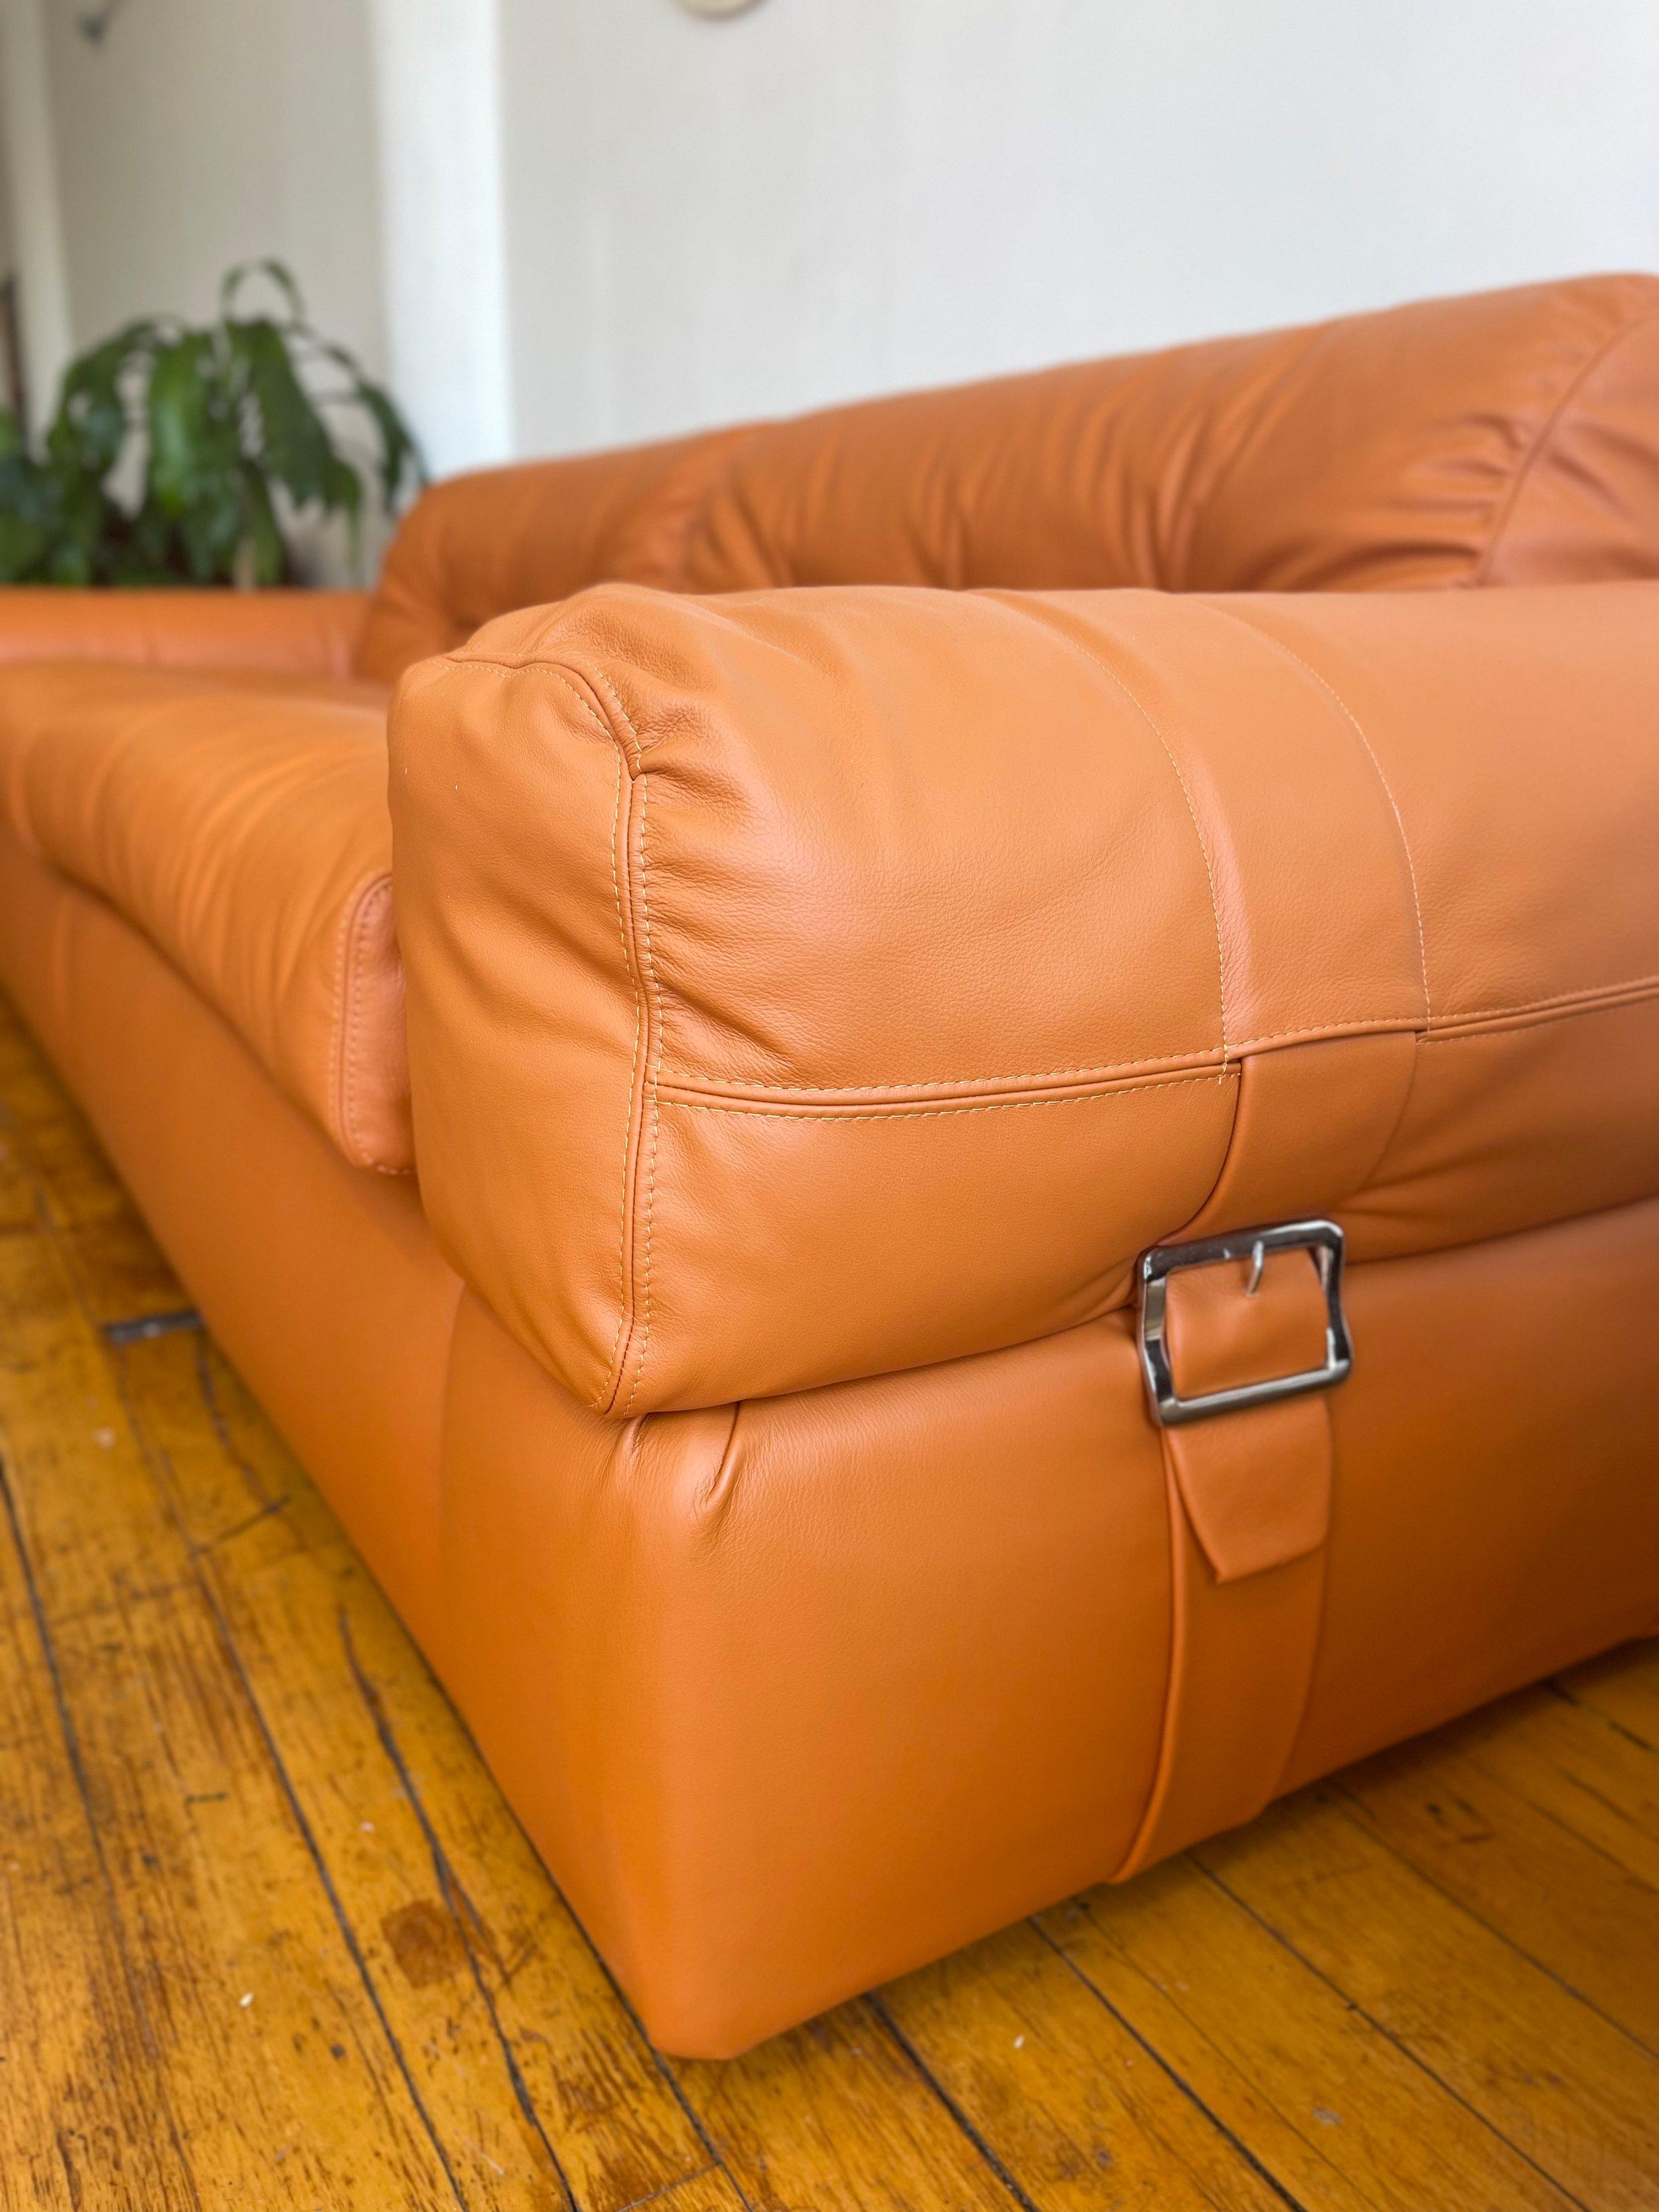 Adriano Piazzesi 1970s Sofa Newly Upholstered with Copper Brown Italian Leather For Sale 7